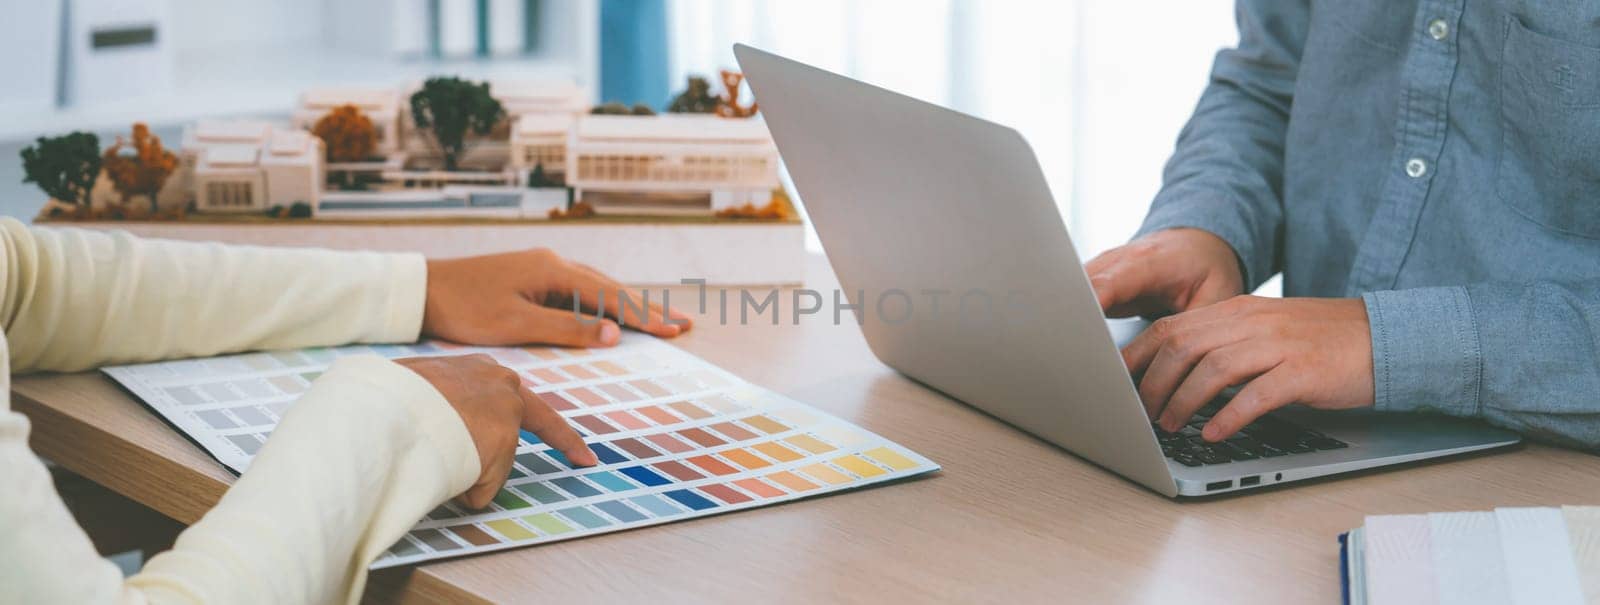 Architect interior designer selects color by using color swatches during his colleague searching information by using laptop. Creative design and teamwork concept. Closeup. Variegated.